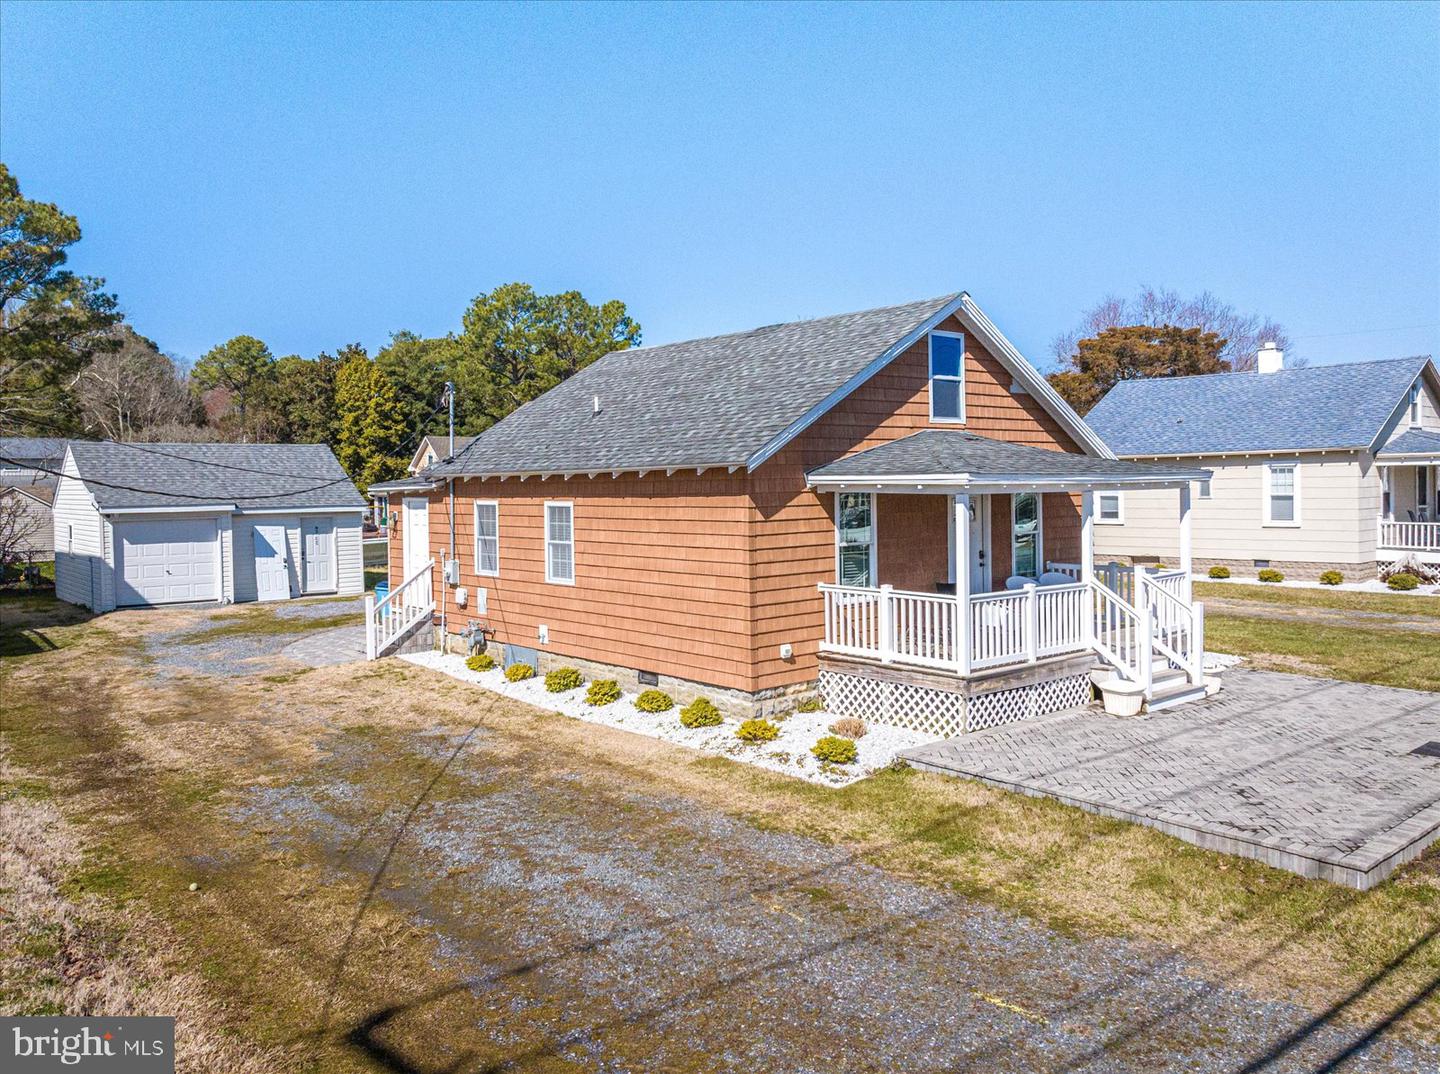 MDWO2019446-802902726184-2024-03-07-00-07-58 9801 / 9805 Golf Course Rd | Ocean City, MD Real Estate For Sale | MLS# Mdwo2019446  - 1st Choice Properties